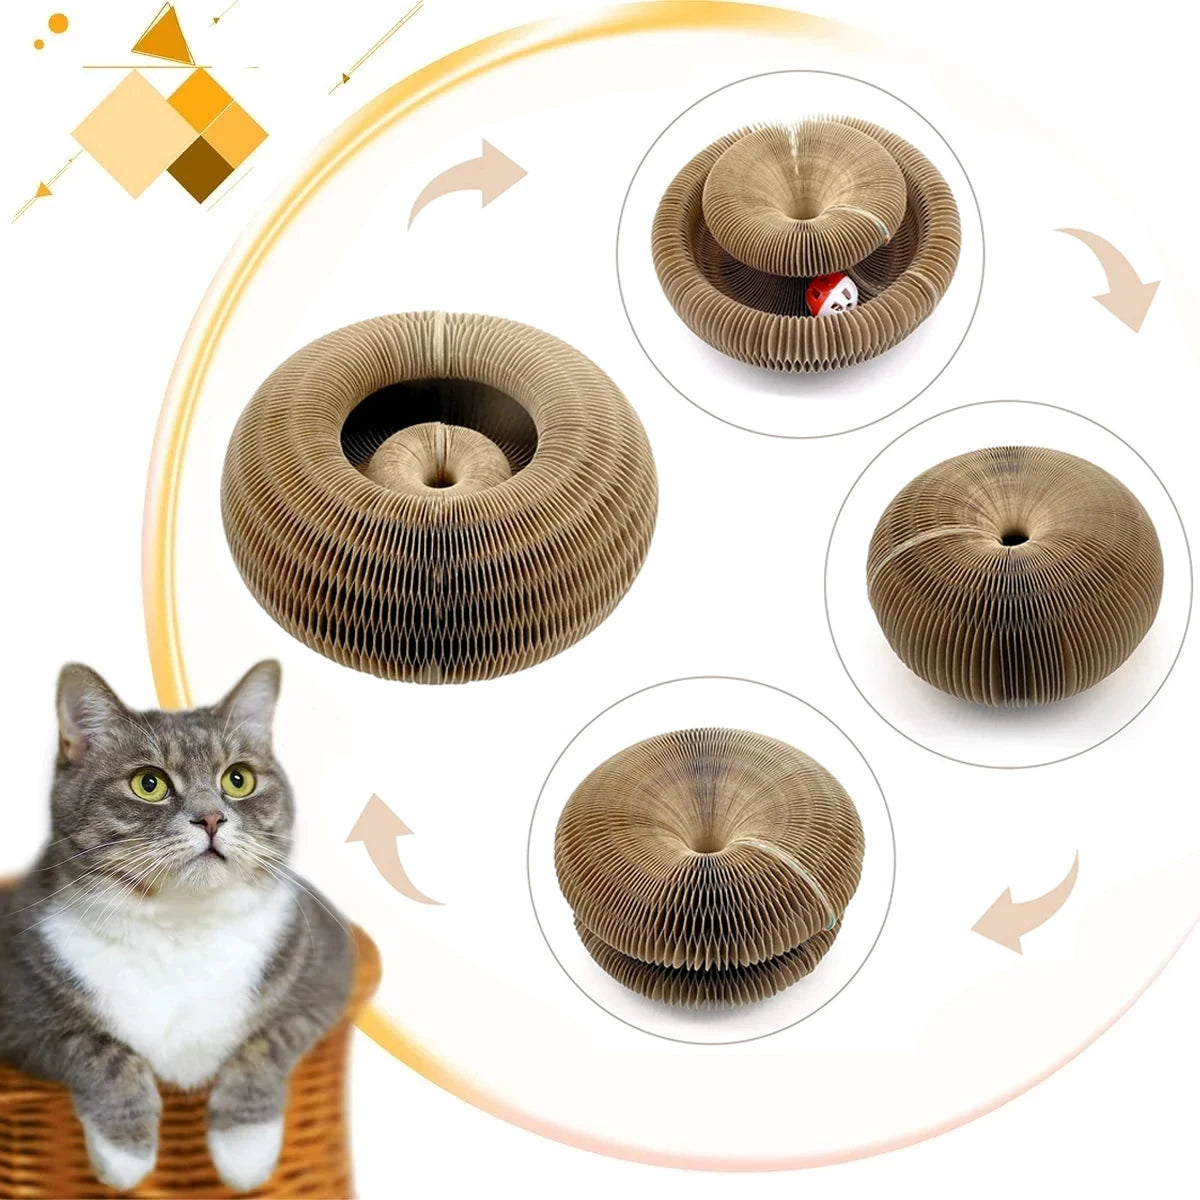 Magic Organ Cat Toy Cats Scratcher Scratch Board Round Corrugated Scratching Post Toys for Cats Grinding Claw Cat Accessories